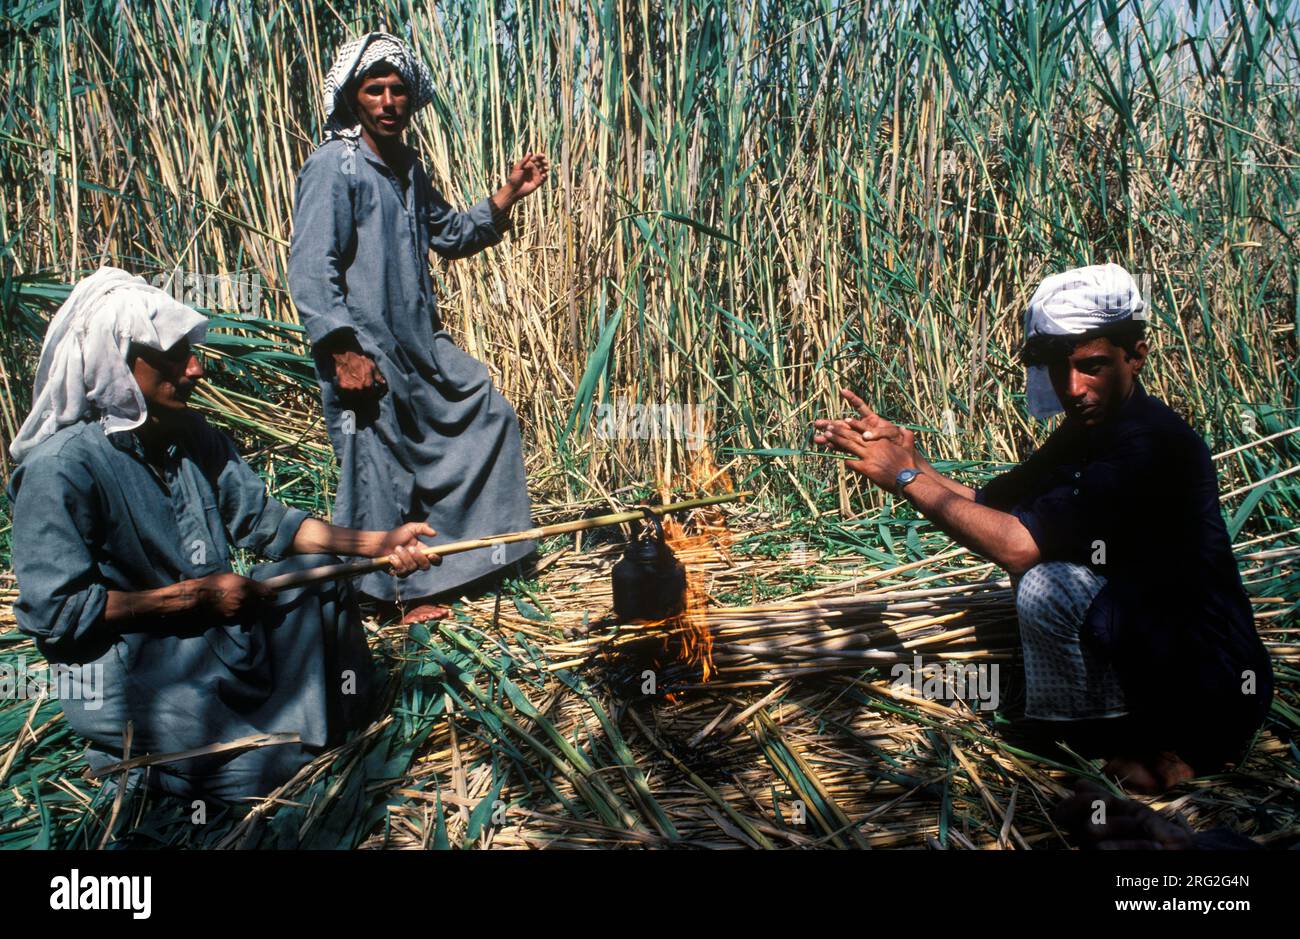 Marsh Arabs Iraq. Marsh Arab cooking over open fire amongst reeds they have been cutting to take back to their village. Rivers Tigris and Euphrates wetlands, Hammar marshes. Southern Iraq 1980s 1984 HOMER SYKES Stock Photo